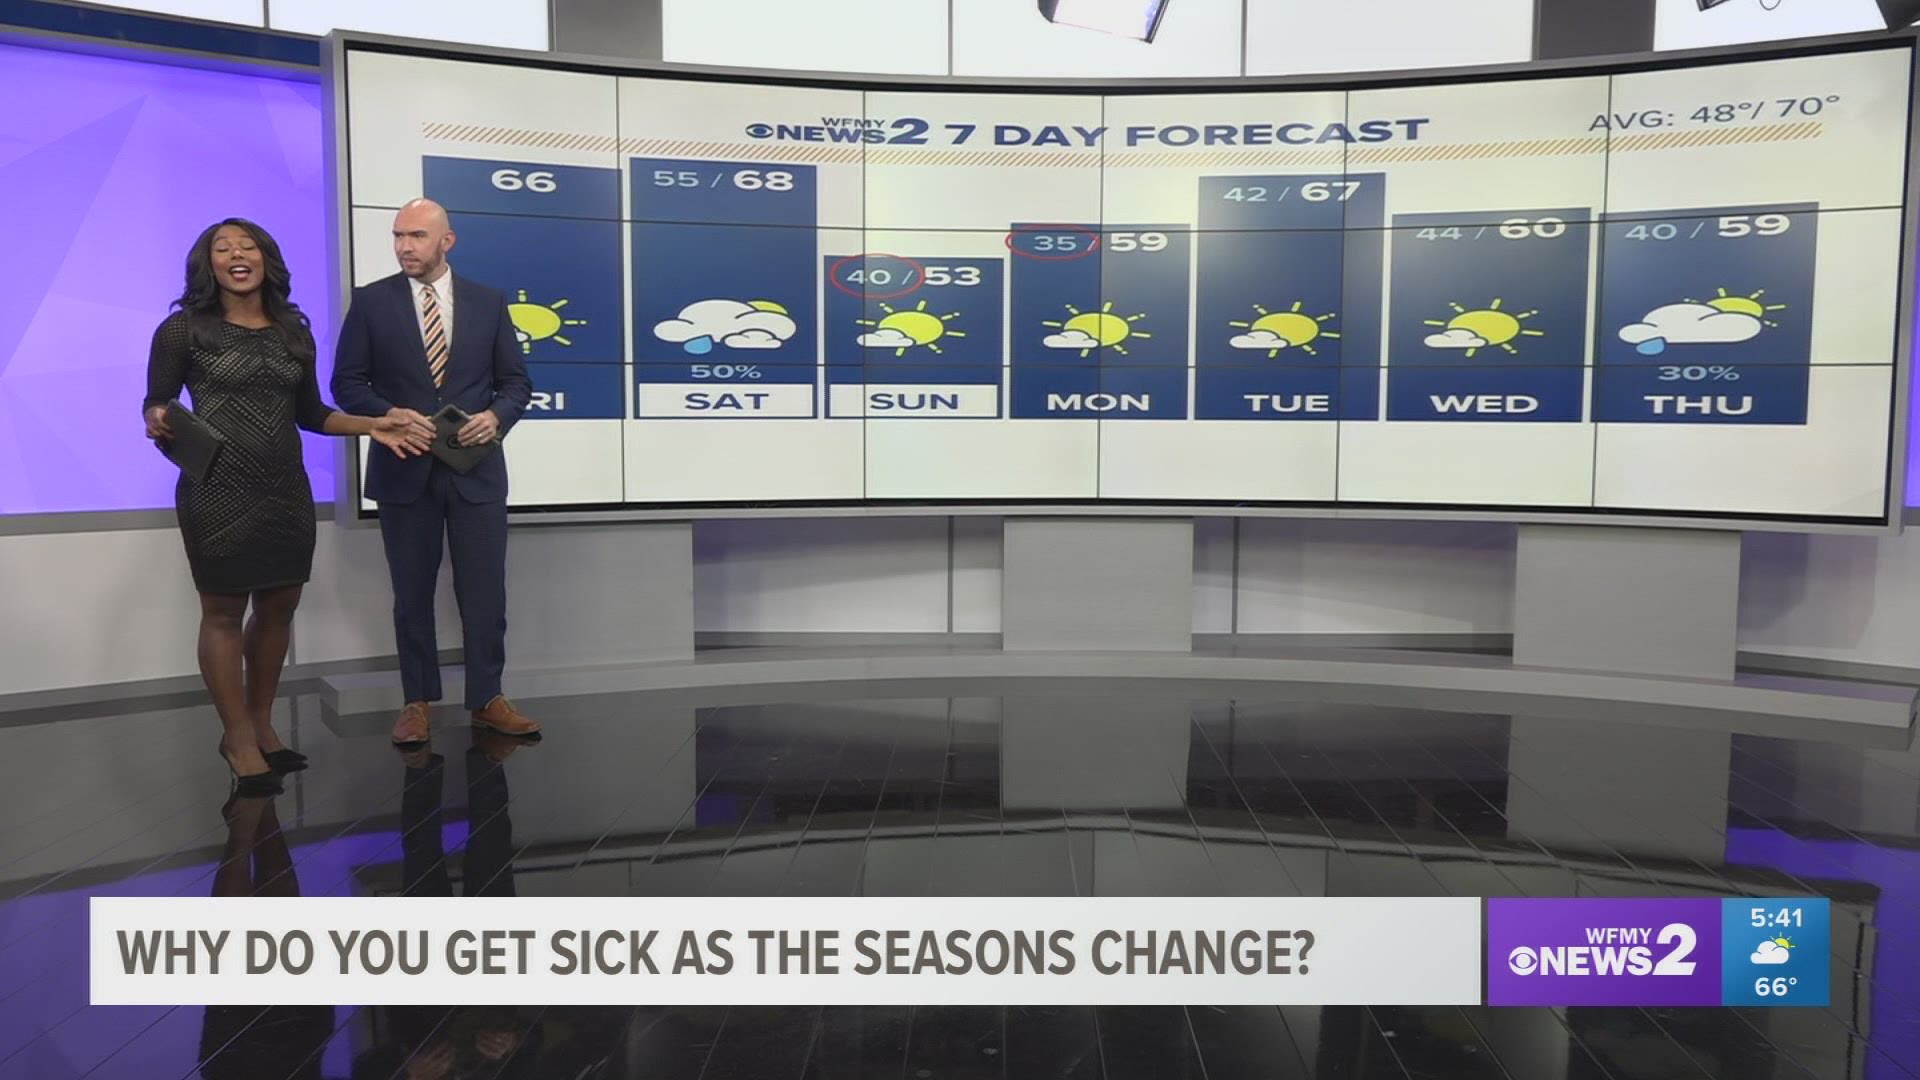 Laura speaks with an expert about seasonal changes and sickness